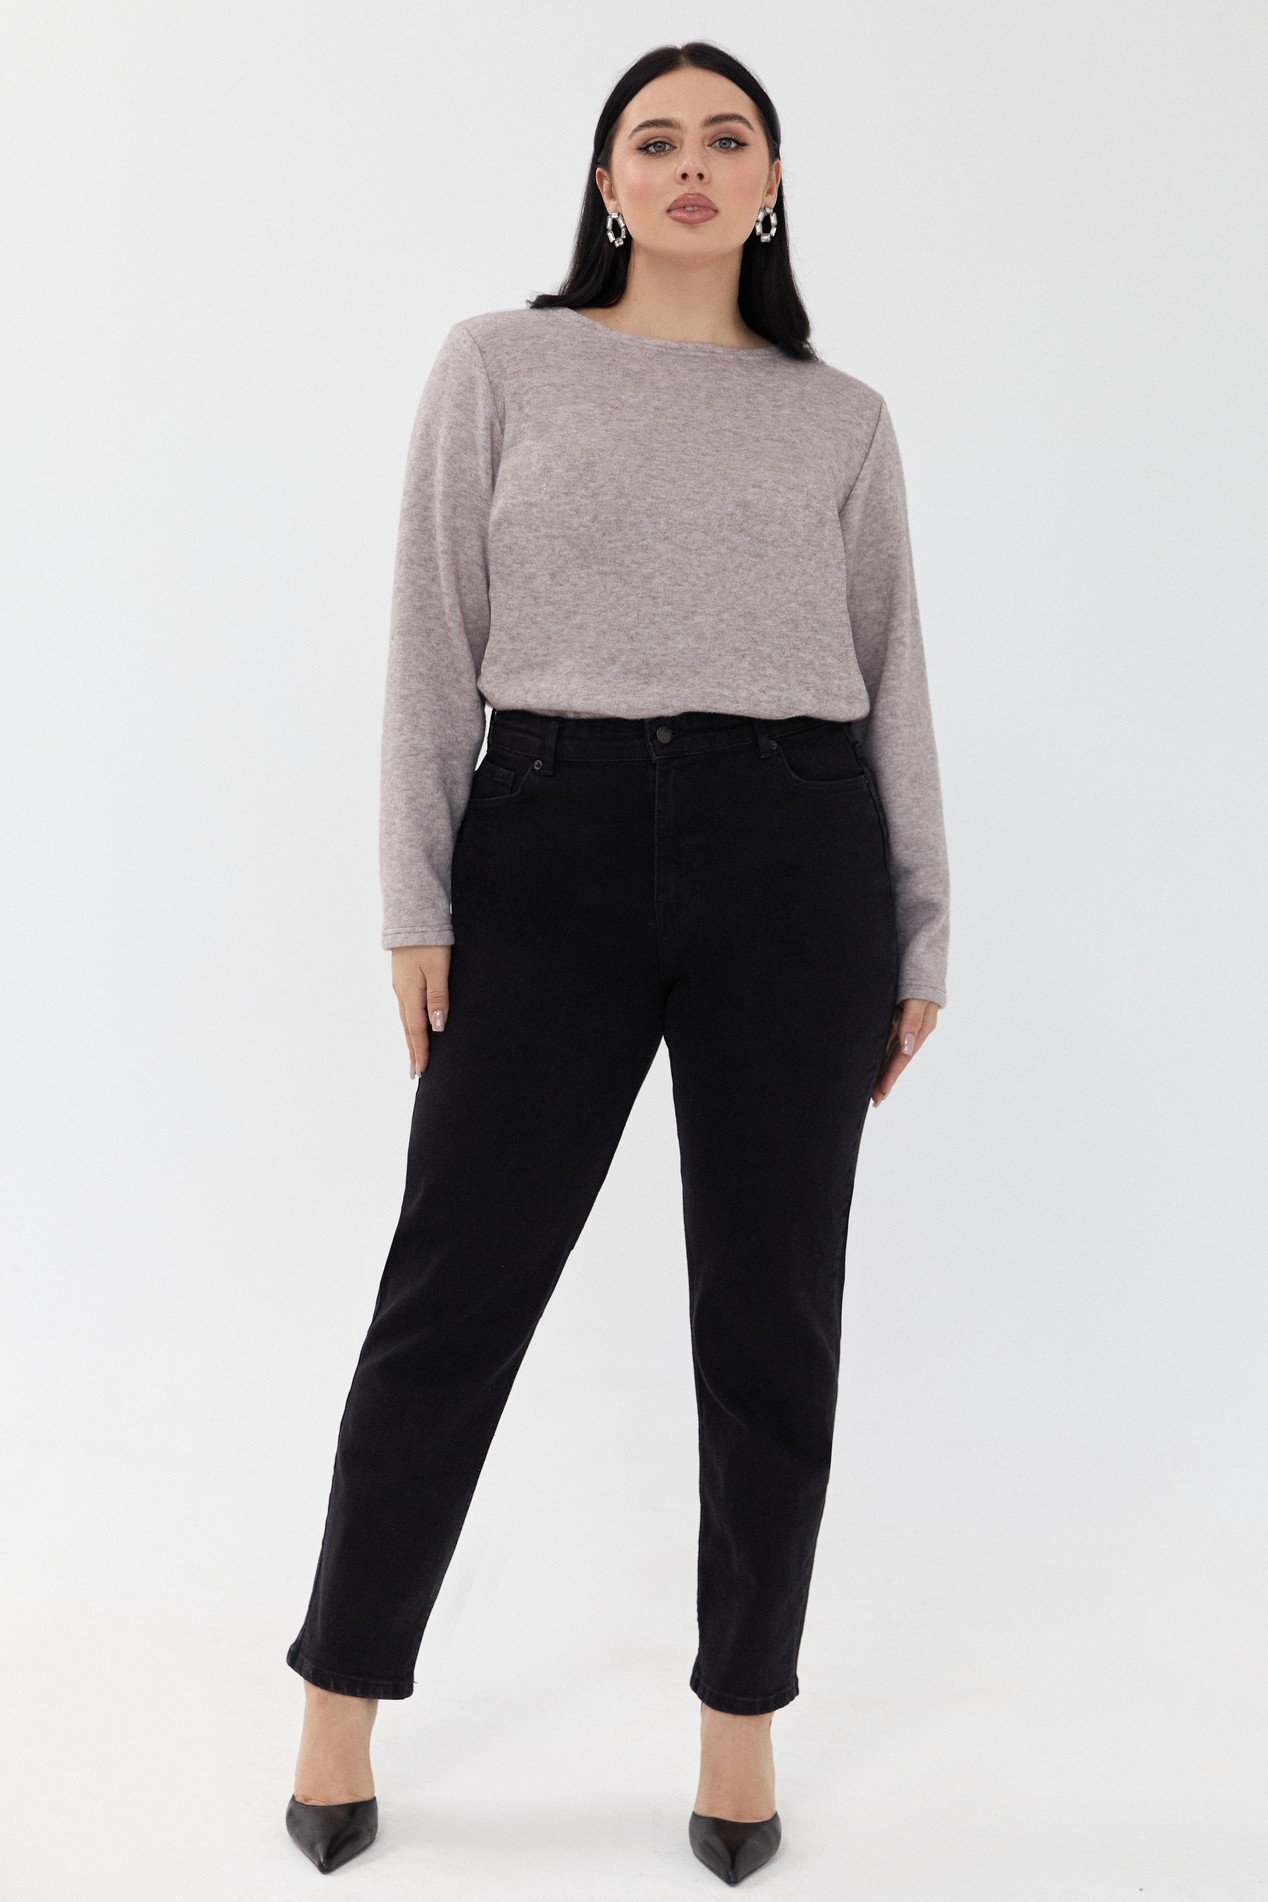 PLUS SIZE CLOTHING TRENDS - EXAMPLES OF A STYLISH LOOK - VOVK BLOG